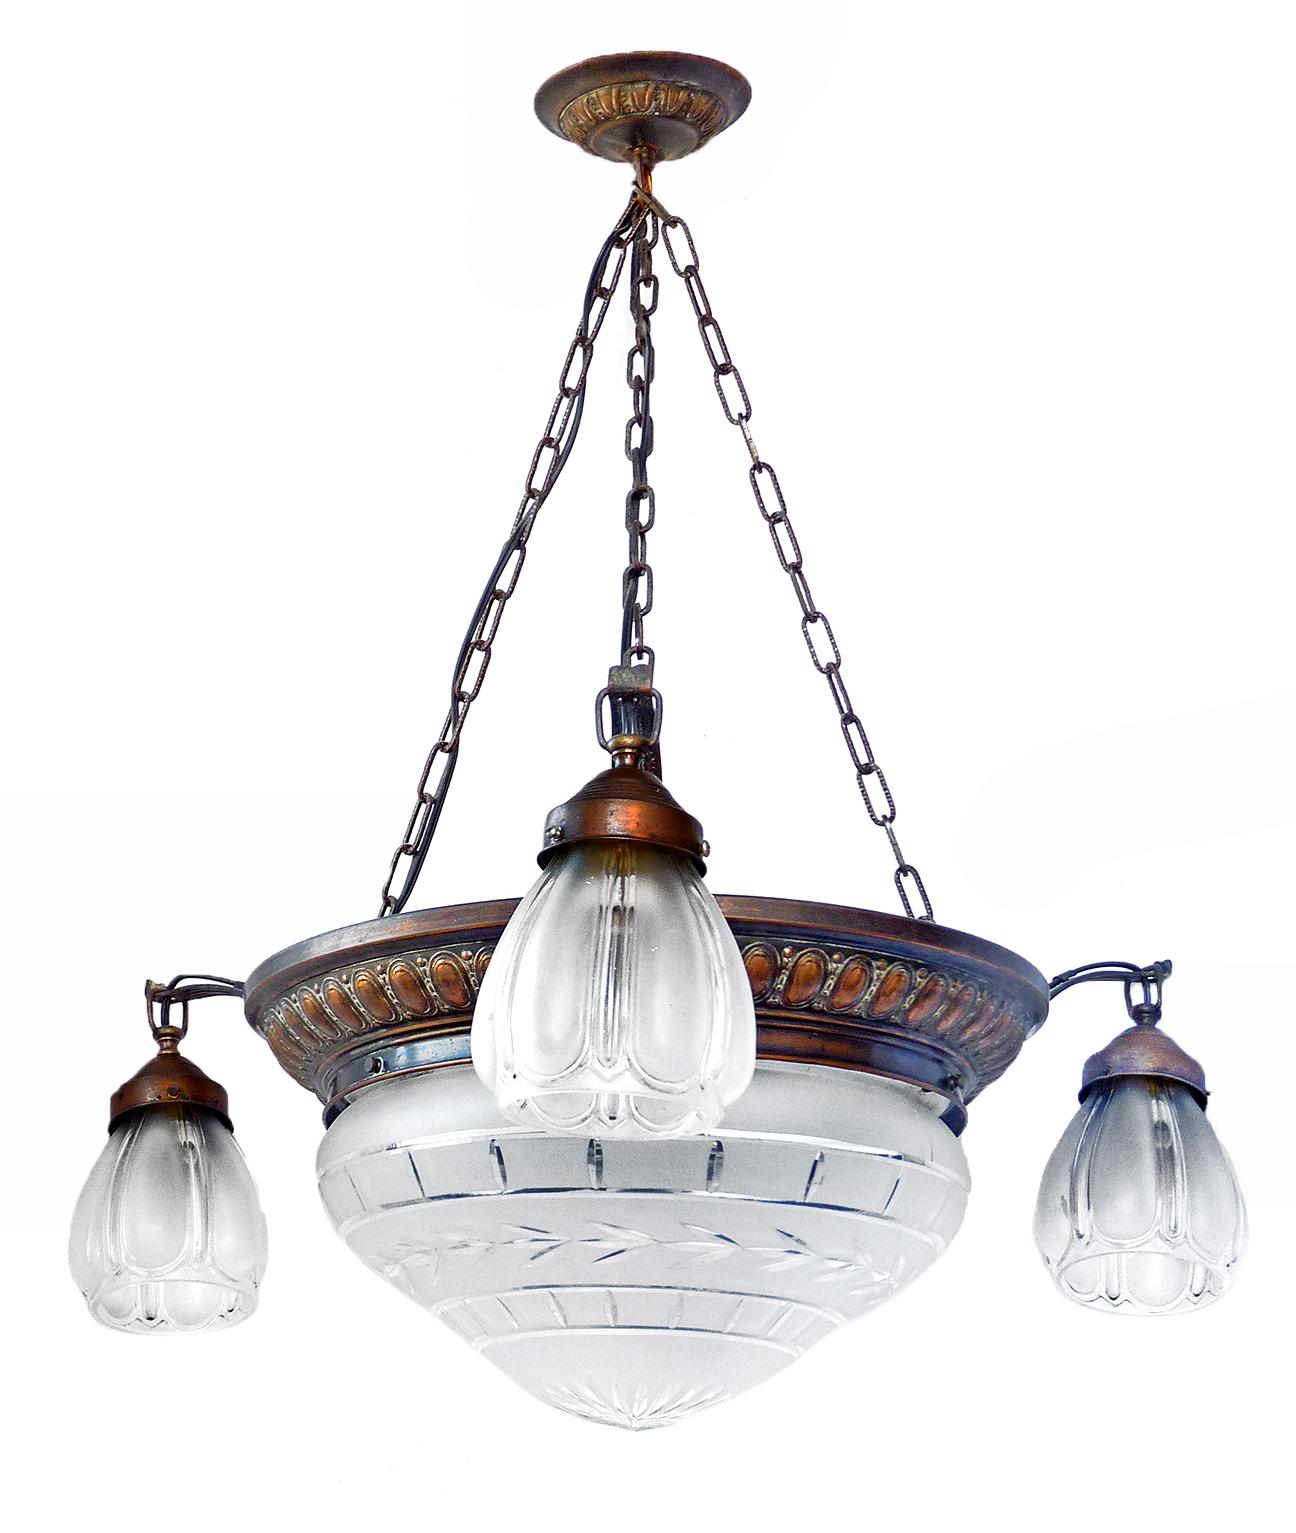 An unusual antique French Art Deco wheel cut crystal glass globes 4-light chandelier,
circa 1920s.

Measures: 
Glass bowl 20 x 22 cm.
Glass globes 13 x 15 cm.

Four bulbs E27/ good working condition
Assembly required. Bulbs not included.